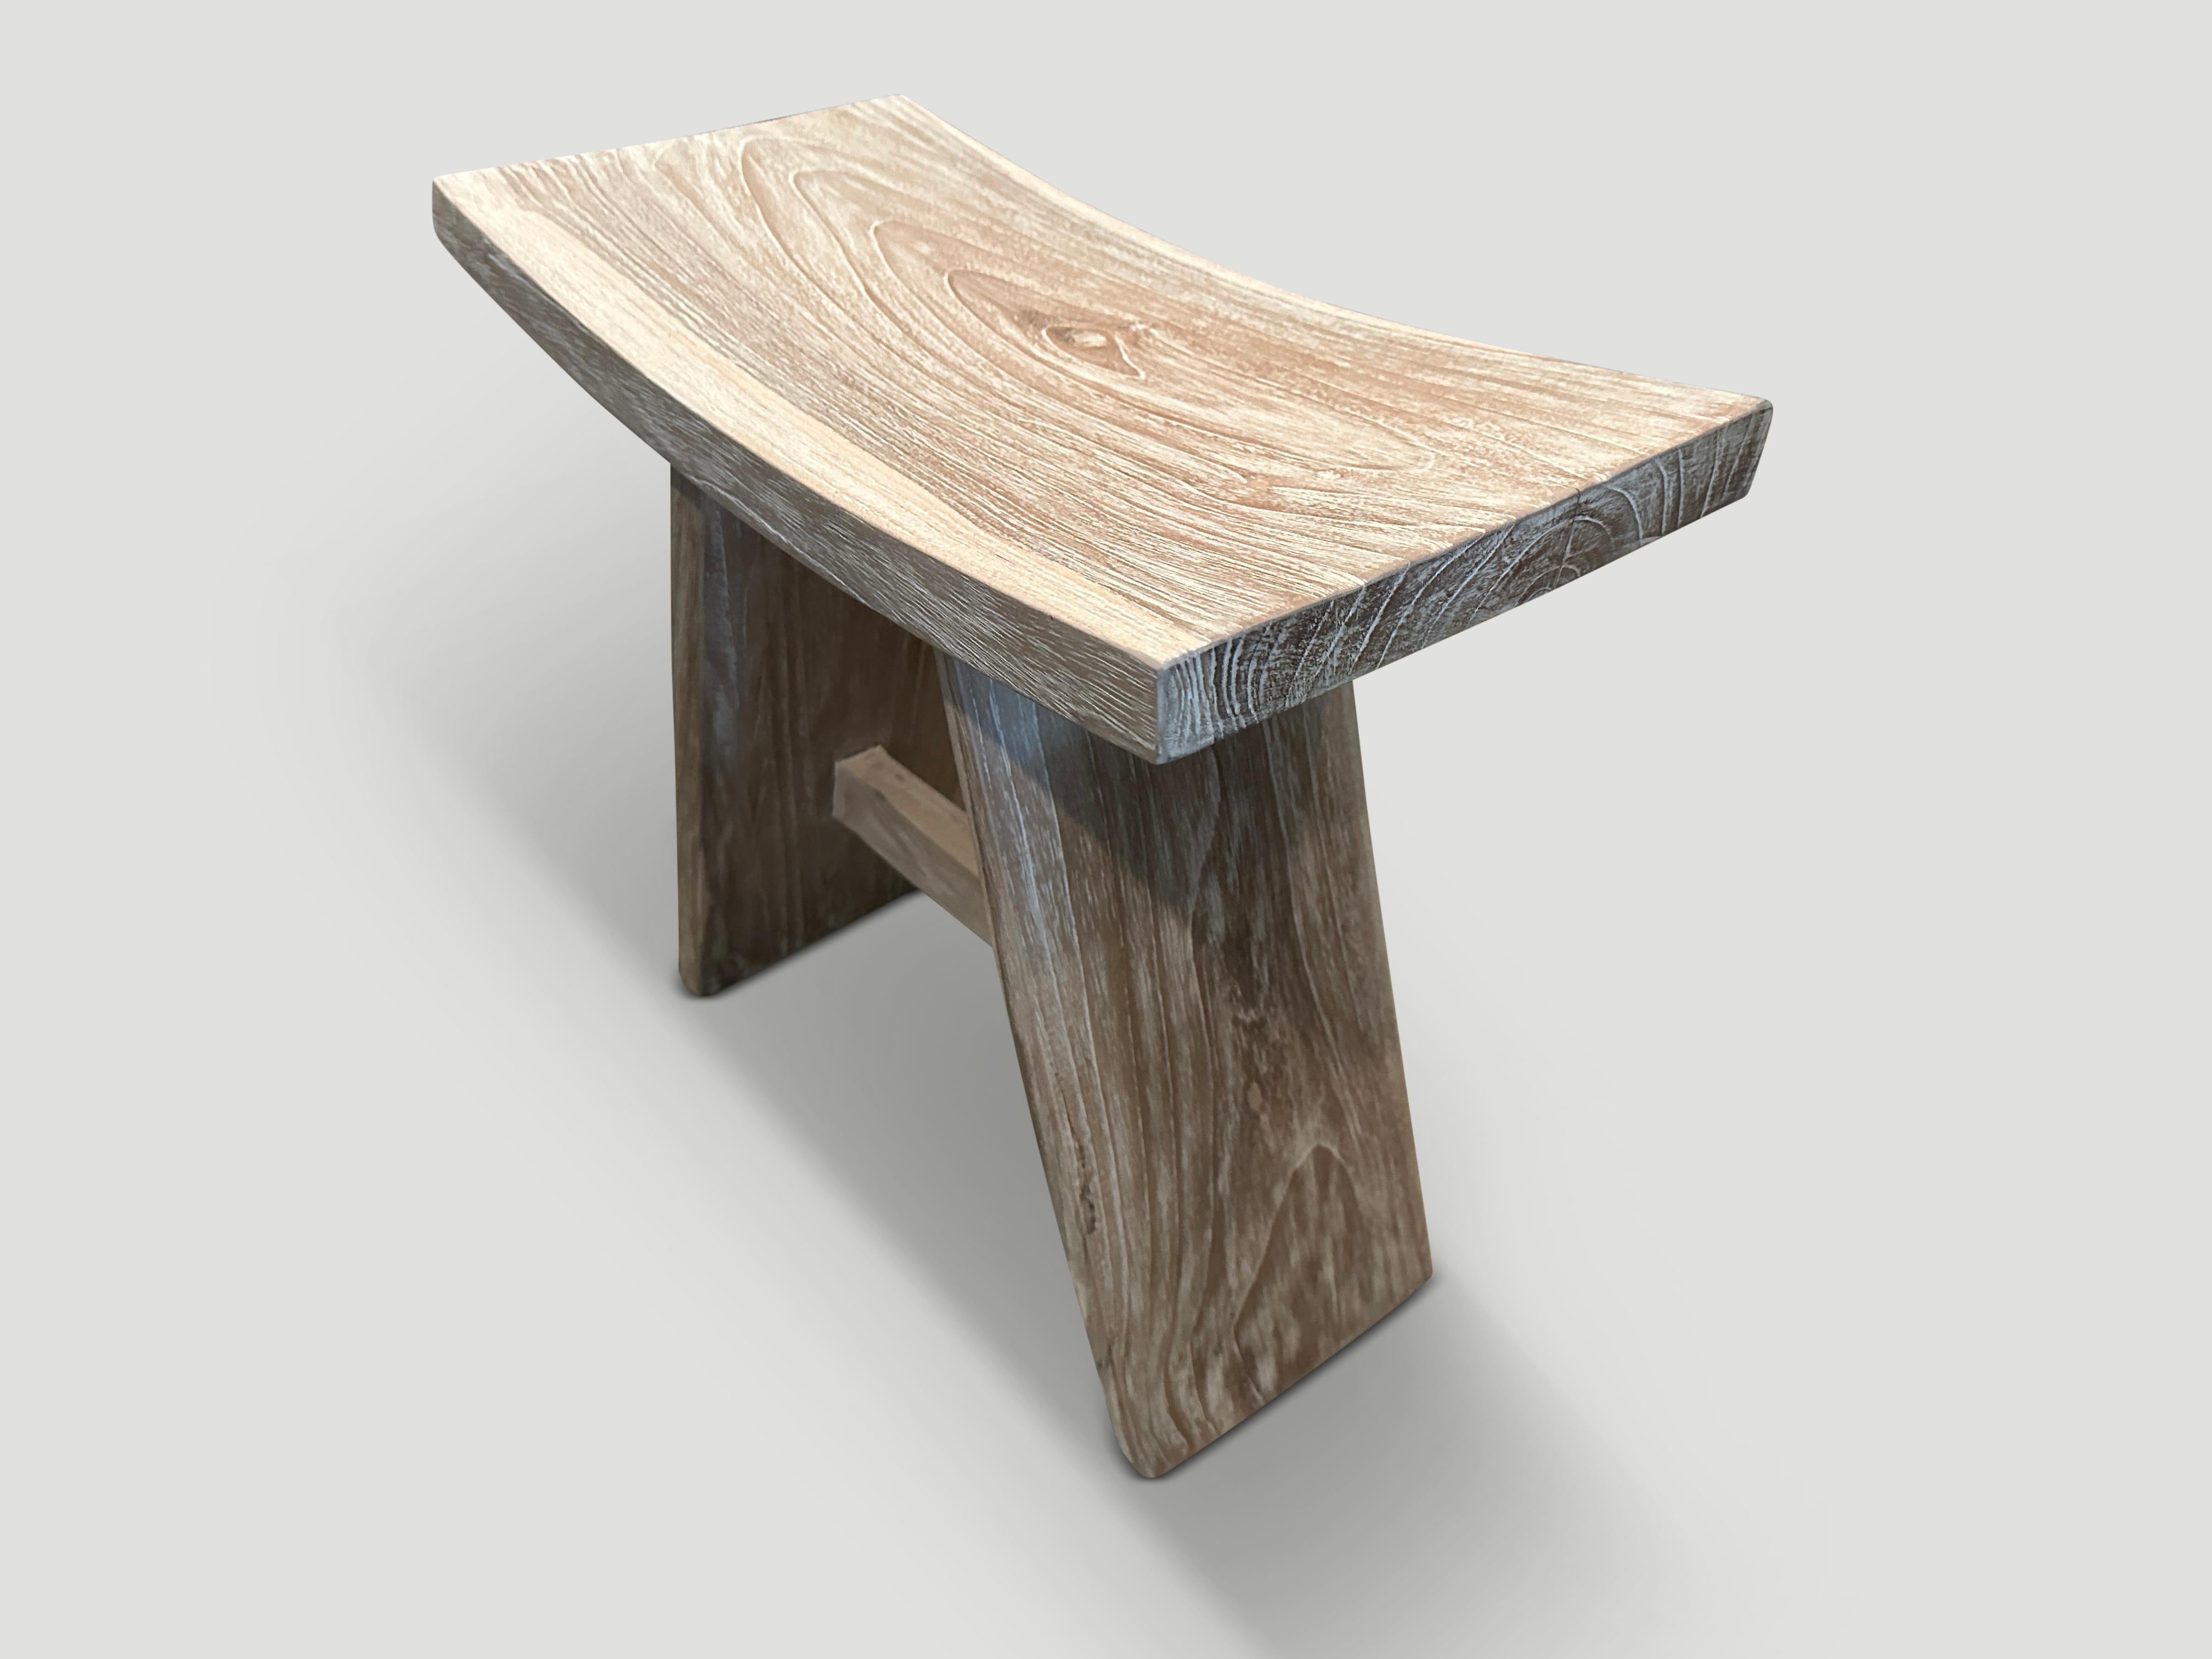 Sleek minimalist bench or stool hand made from a single slab of reclaimed teak and finished with a white wash revealing the beautiful wood grain. Custom sizes and stains available. We just received a new collection in this style. All one of a kind.